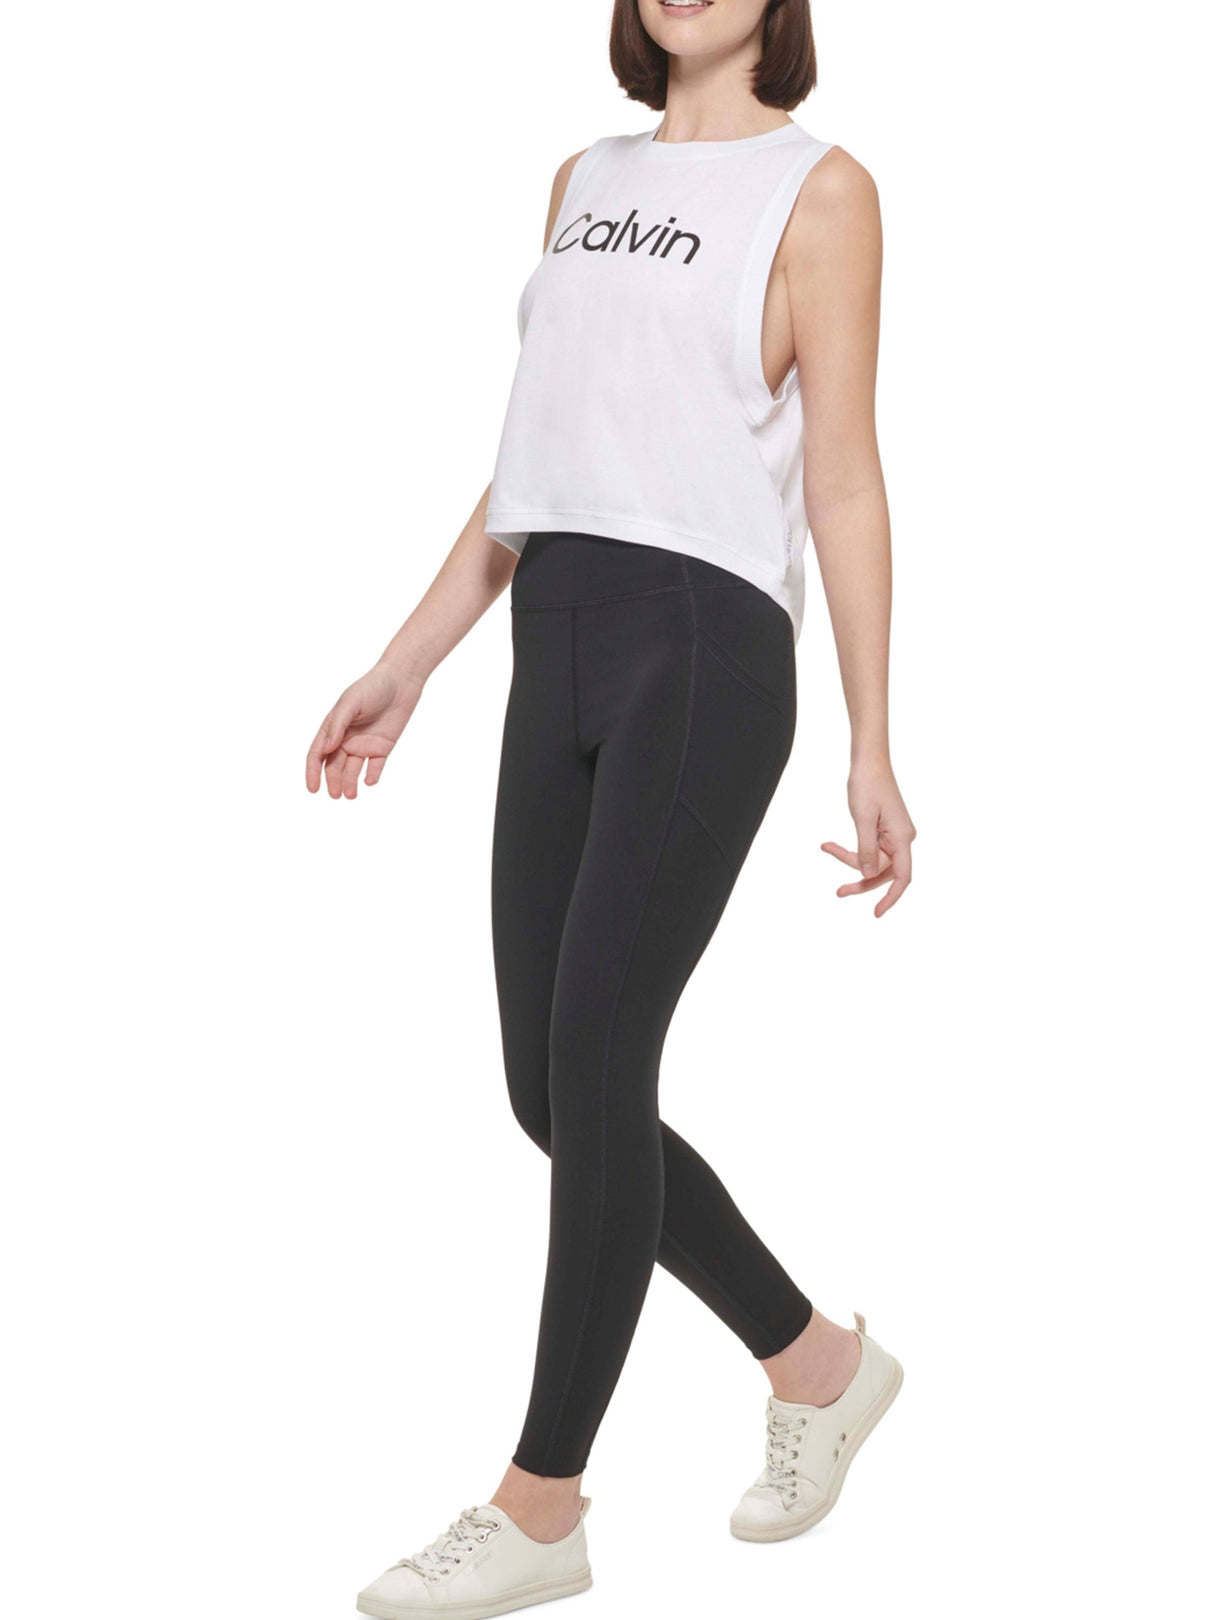 Women's Brand Logo Printed Sport Top,White – All Brands Factory Outlet